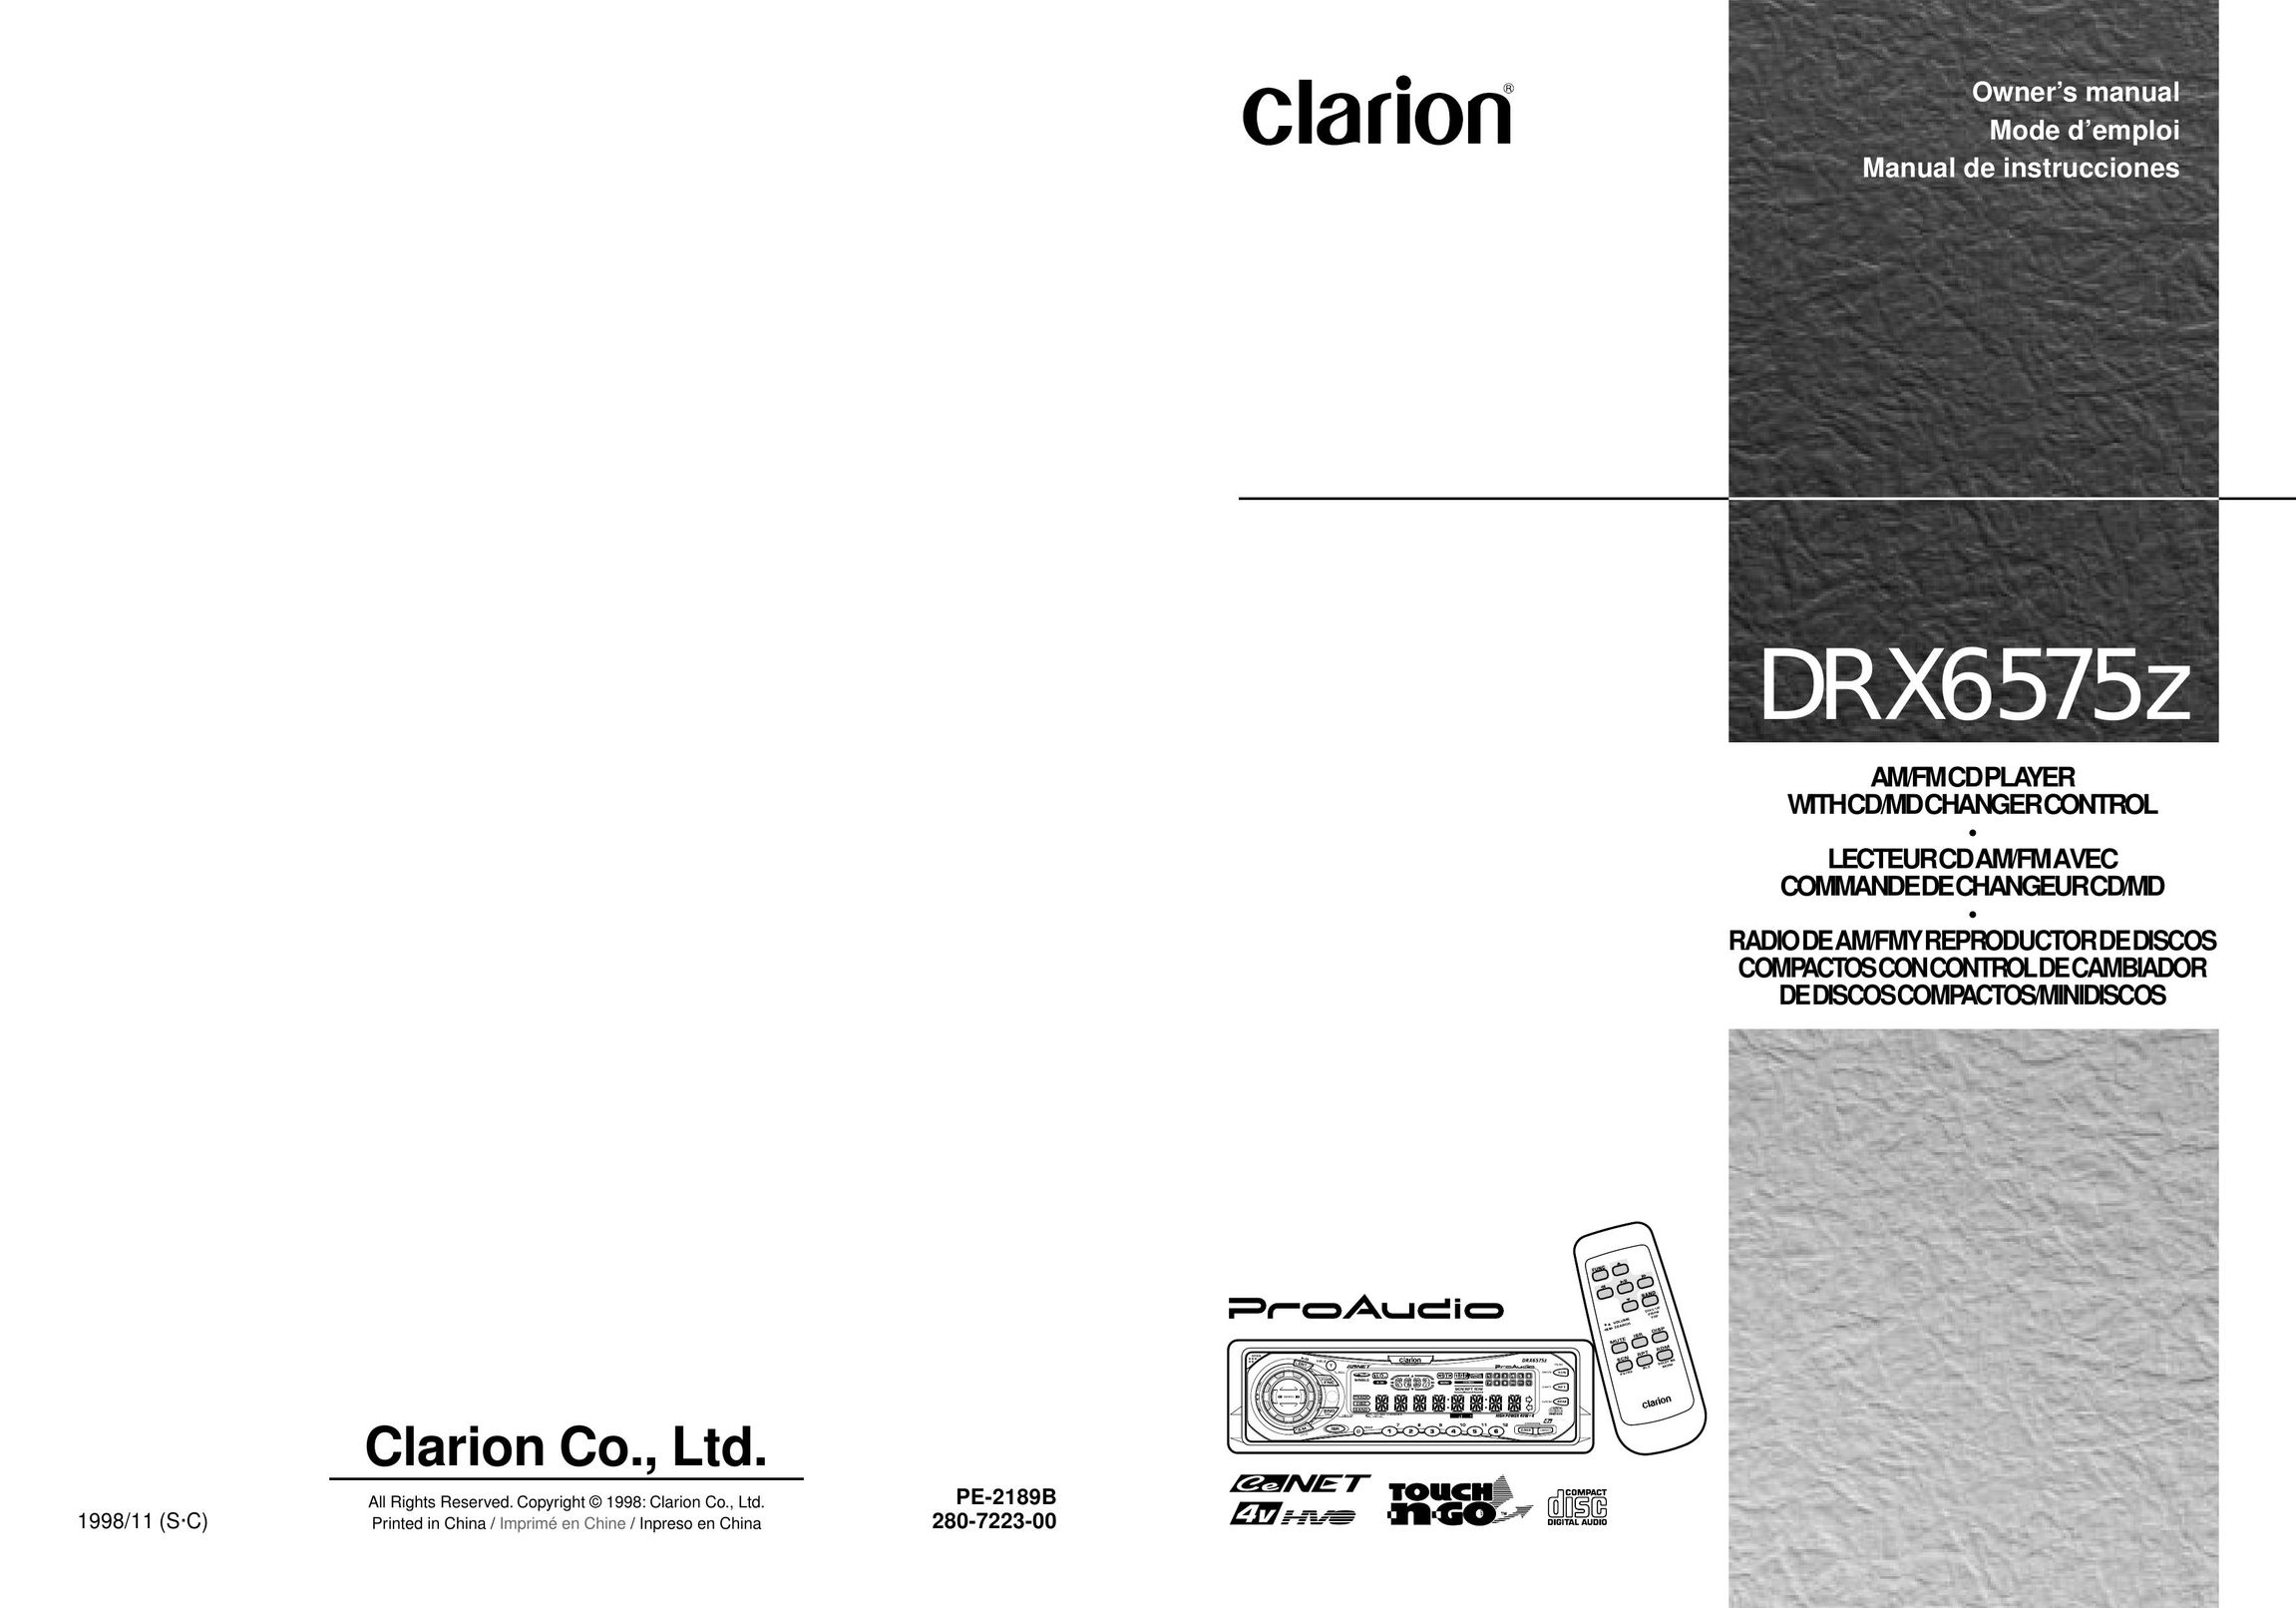 Clarion DRX6575z CD Player User Manual